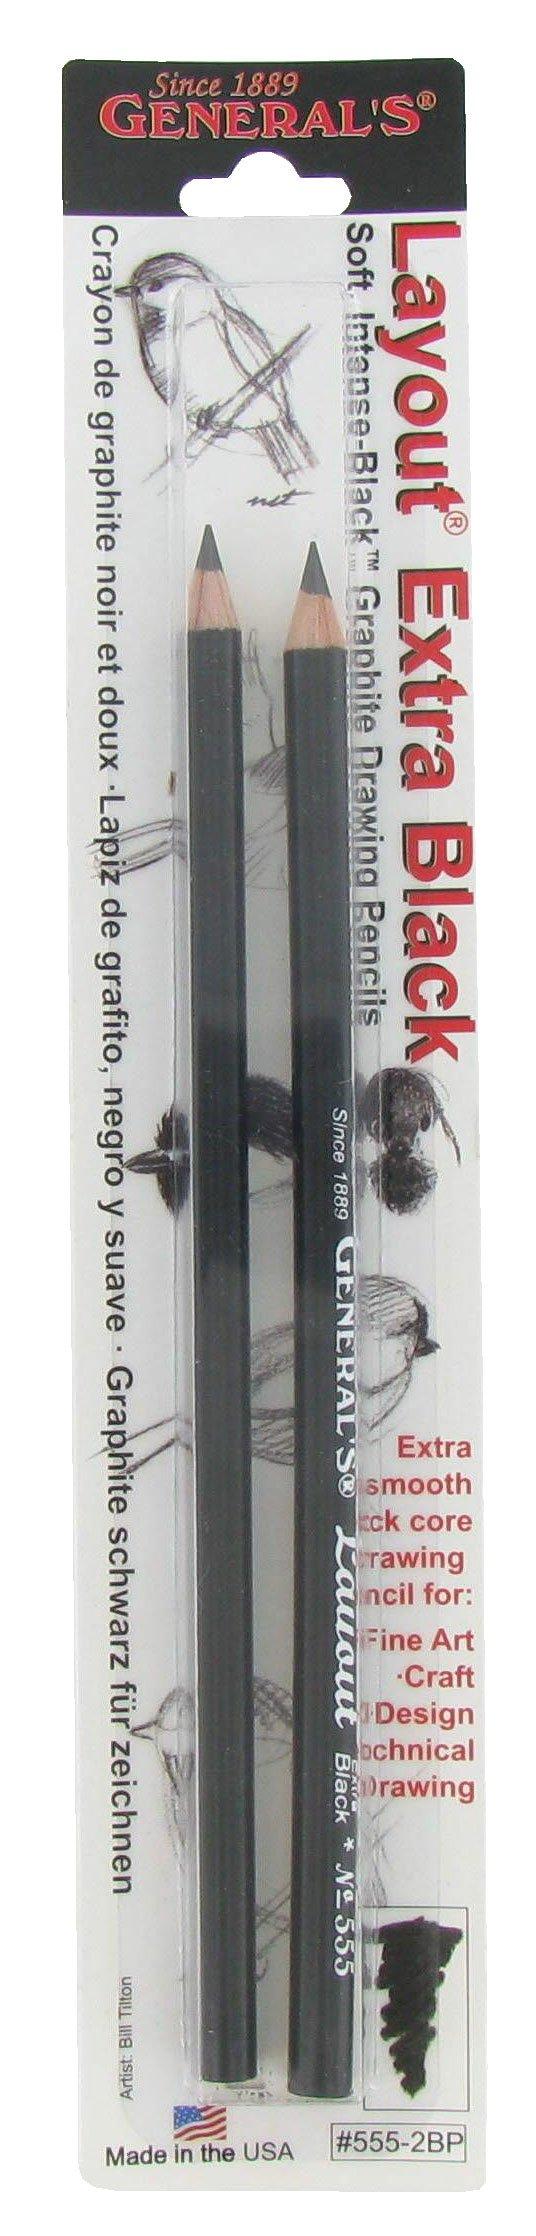 General's Layout Extra Black Pencils 12-Count Package